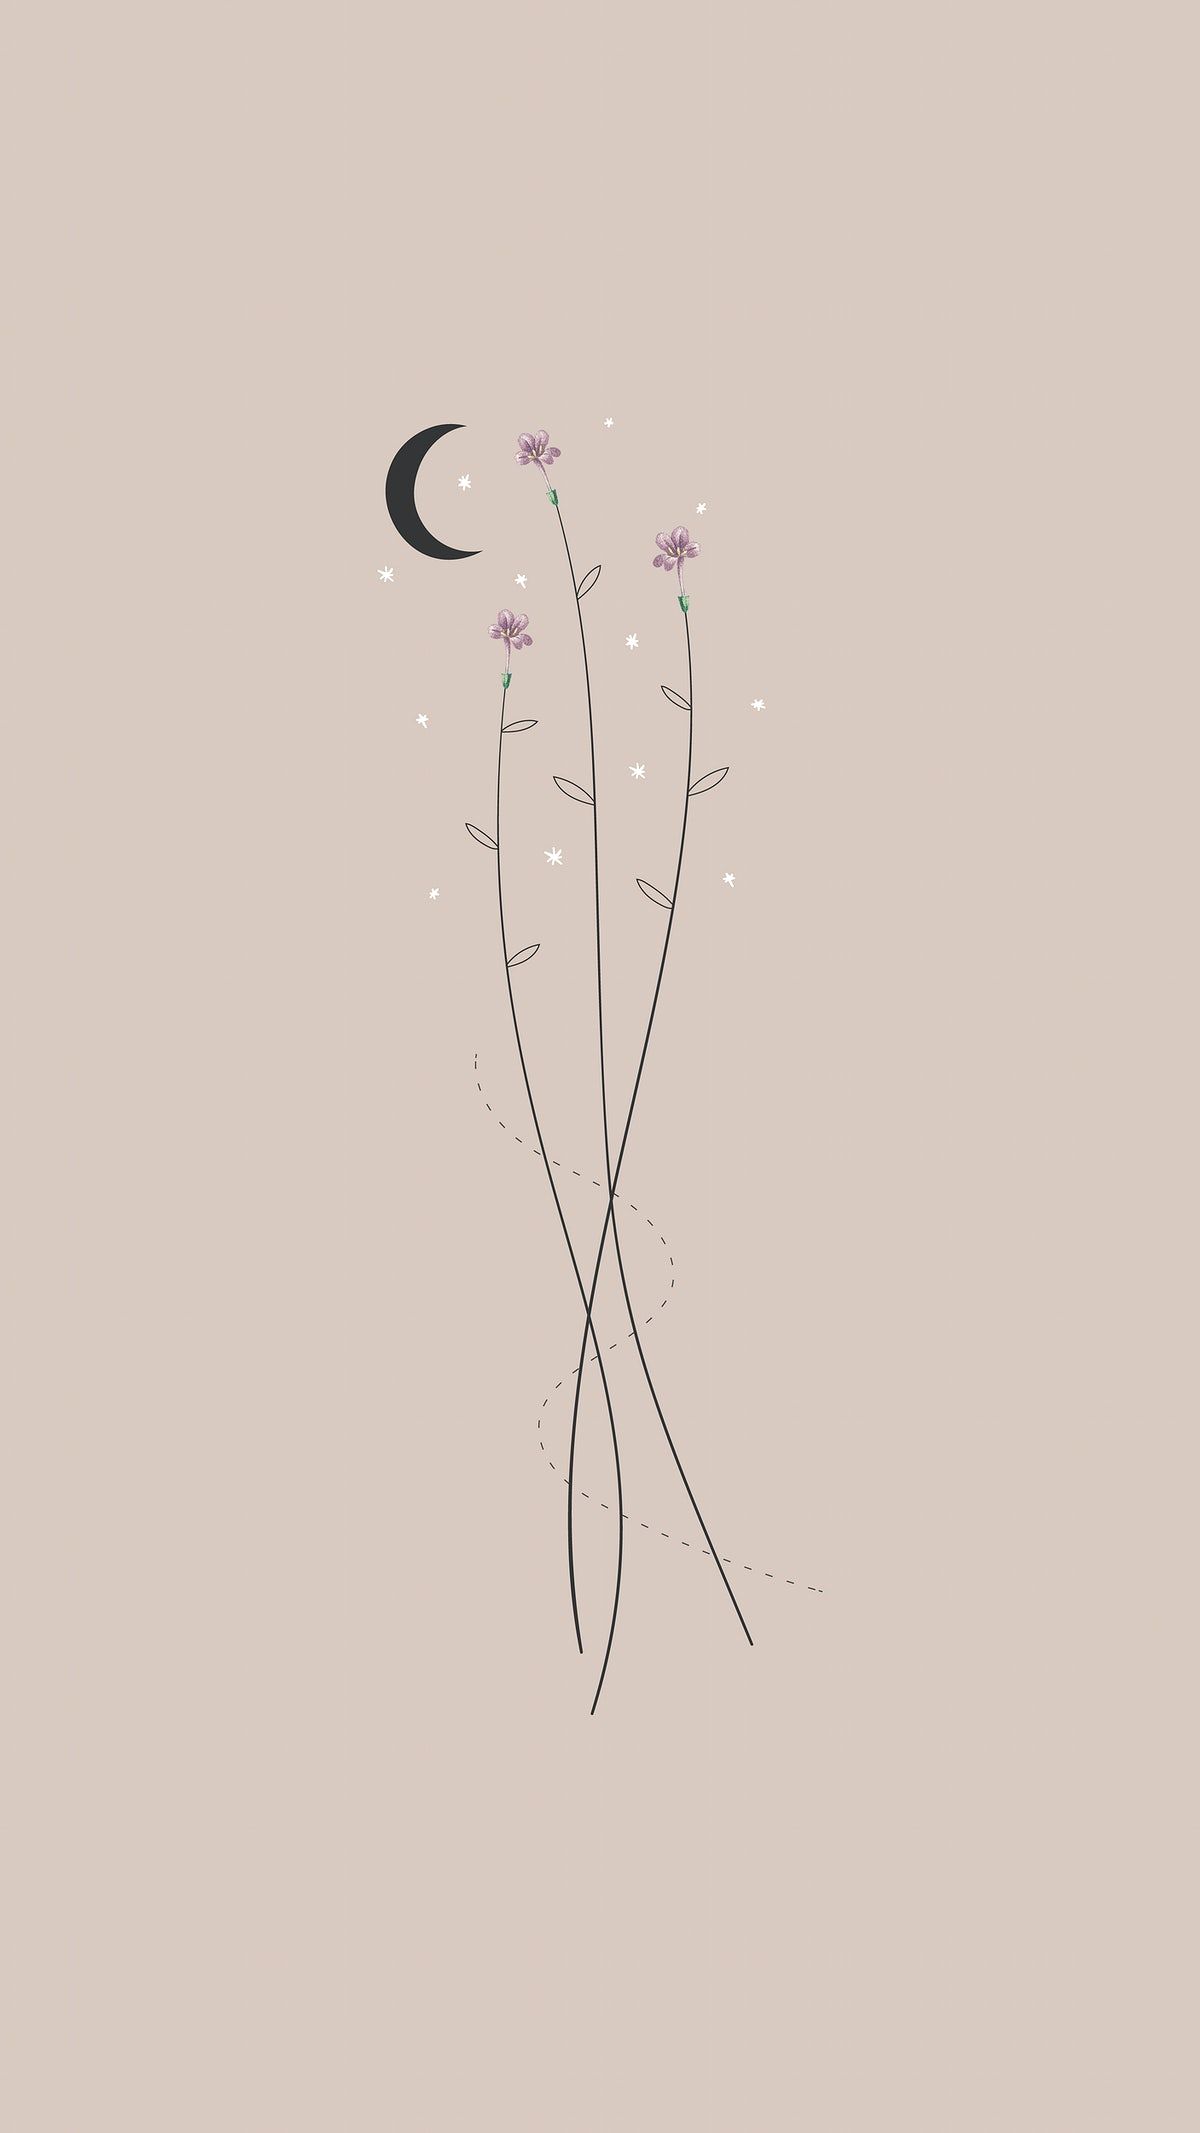 Minimal flowers and a moon mobile wallpaperrawpixel.com · In stock